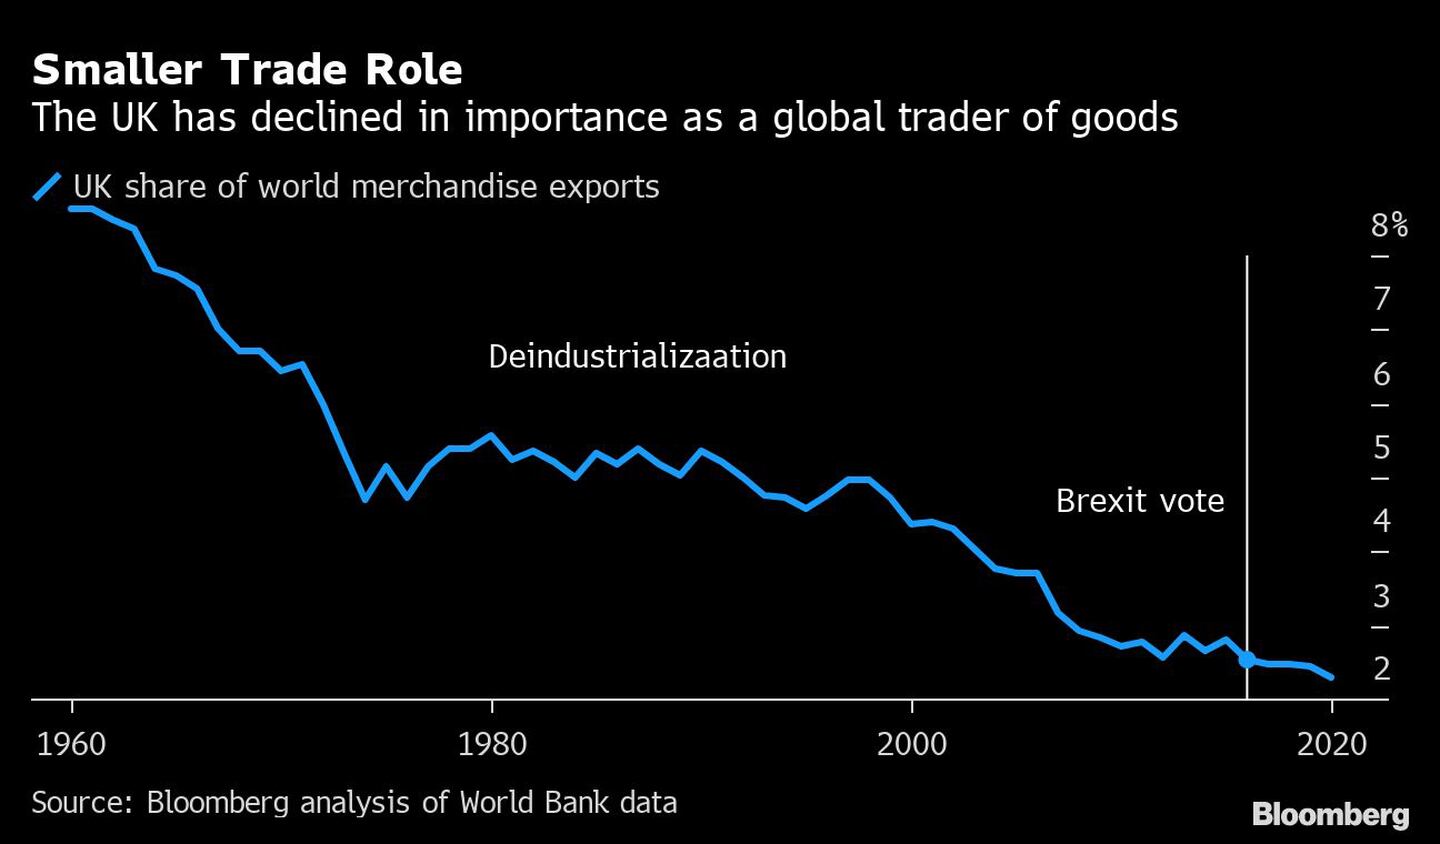 Smaller Trade Role | The UK has declined in importance as a global trader of goodsdfd